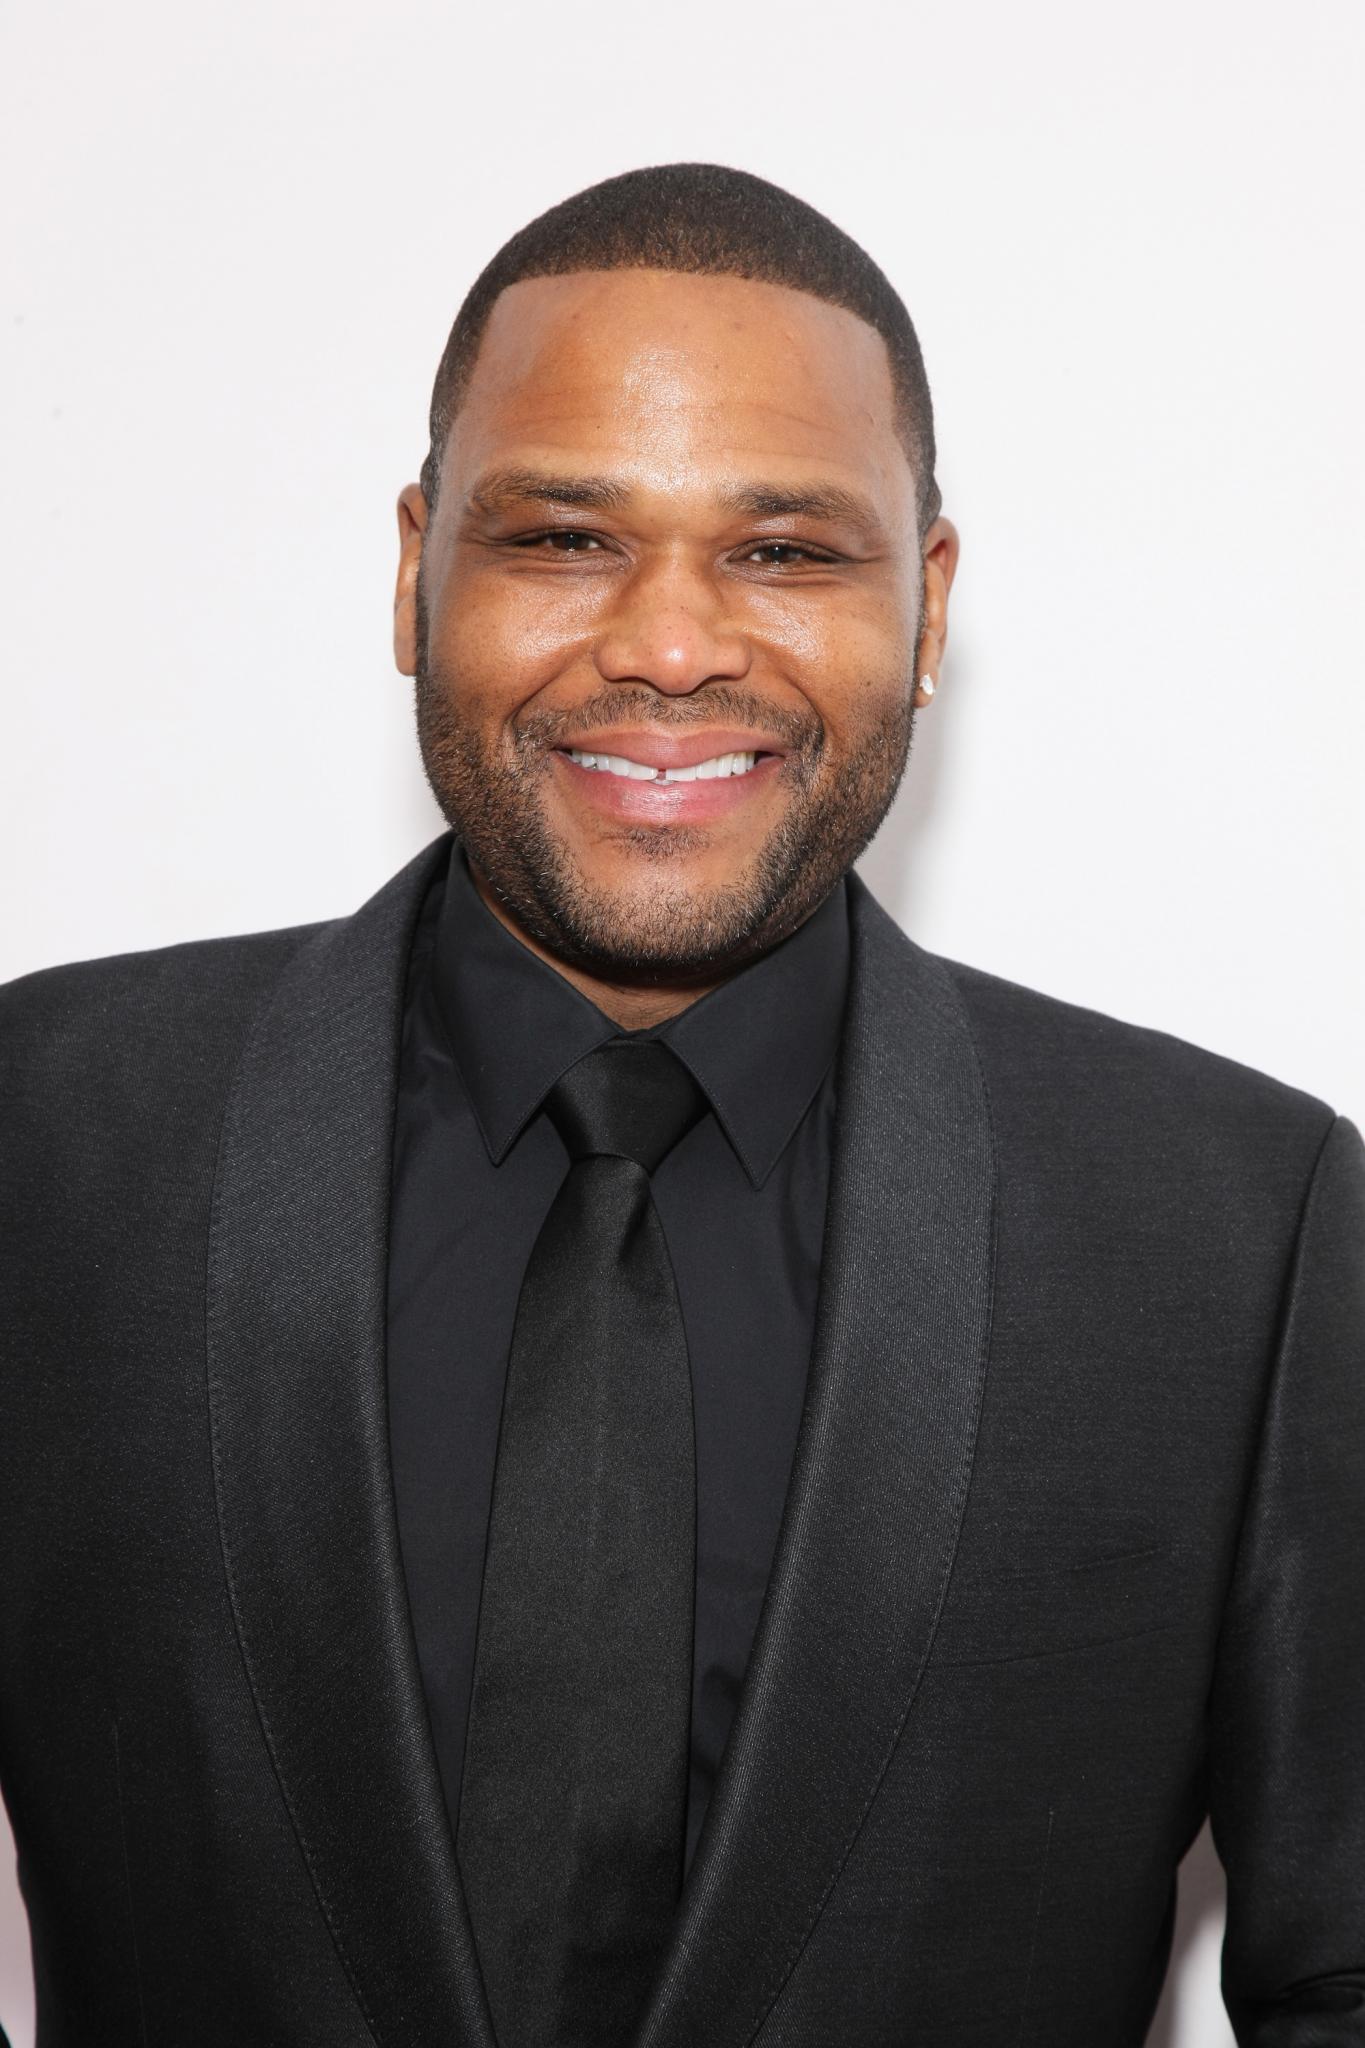 Can 'Black-ish' Go Too Far With Tackling Race? Executive Producer Anthony Anderson Says No
